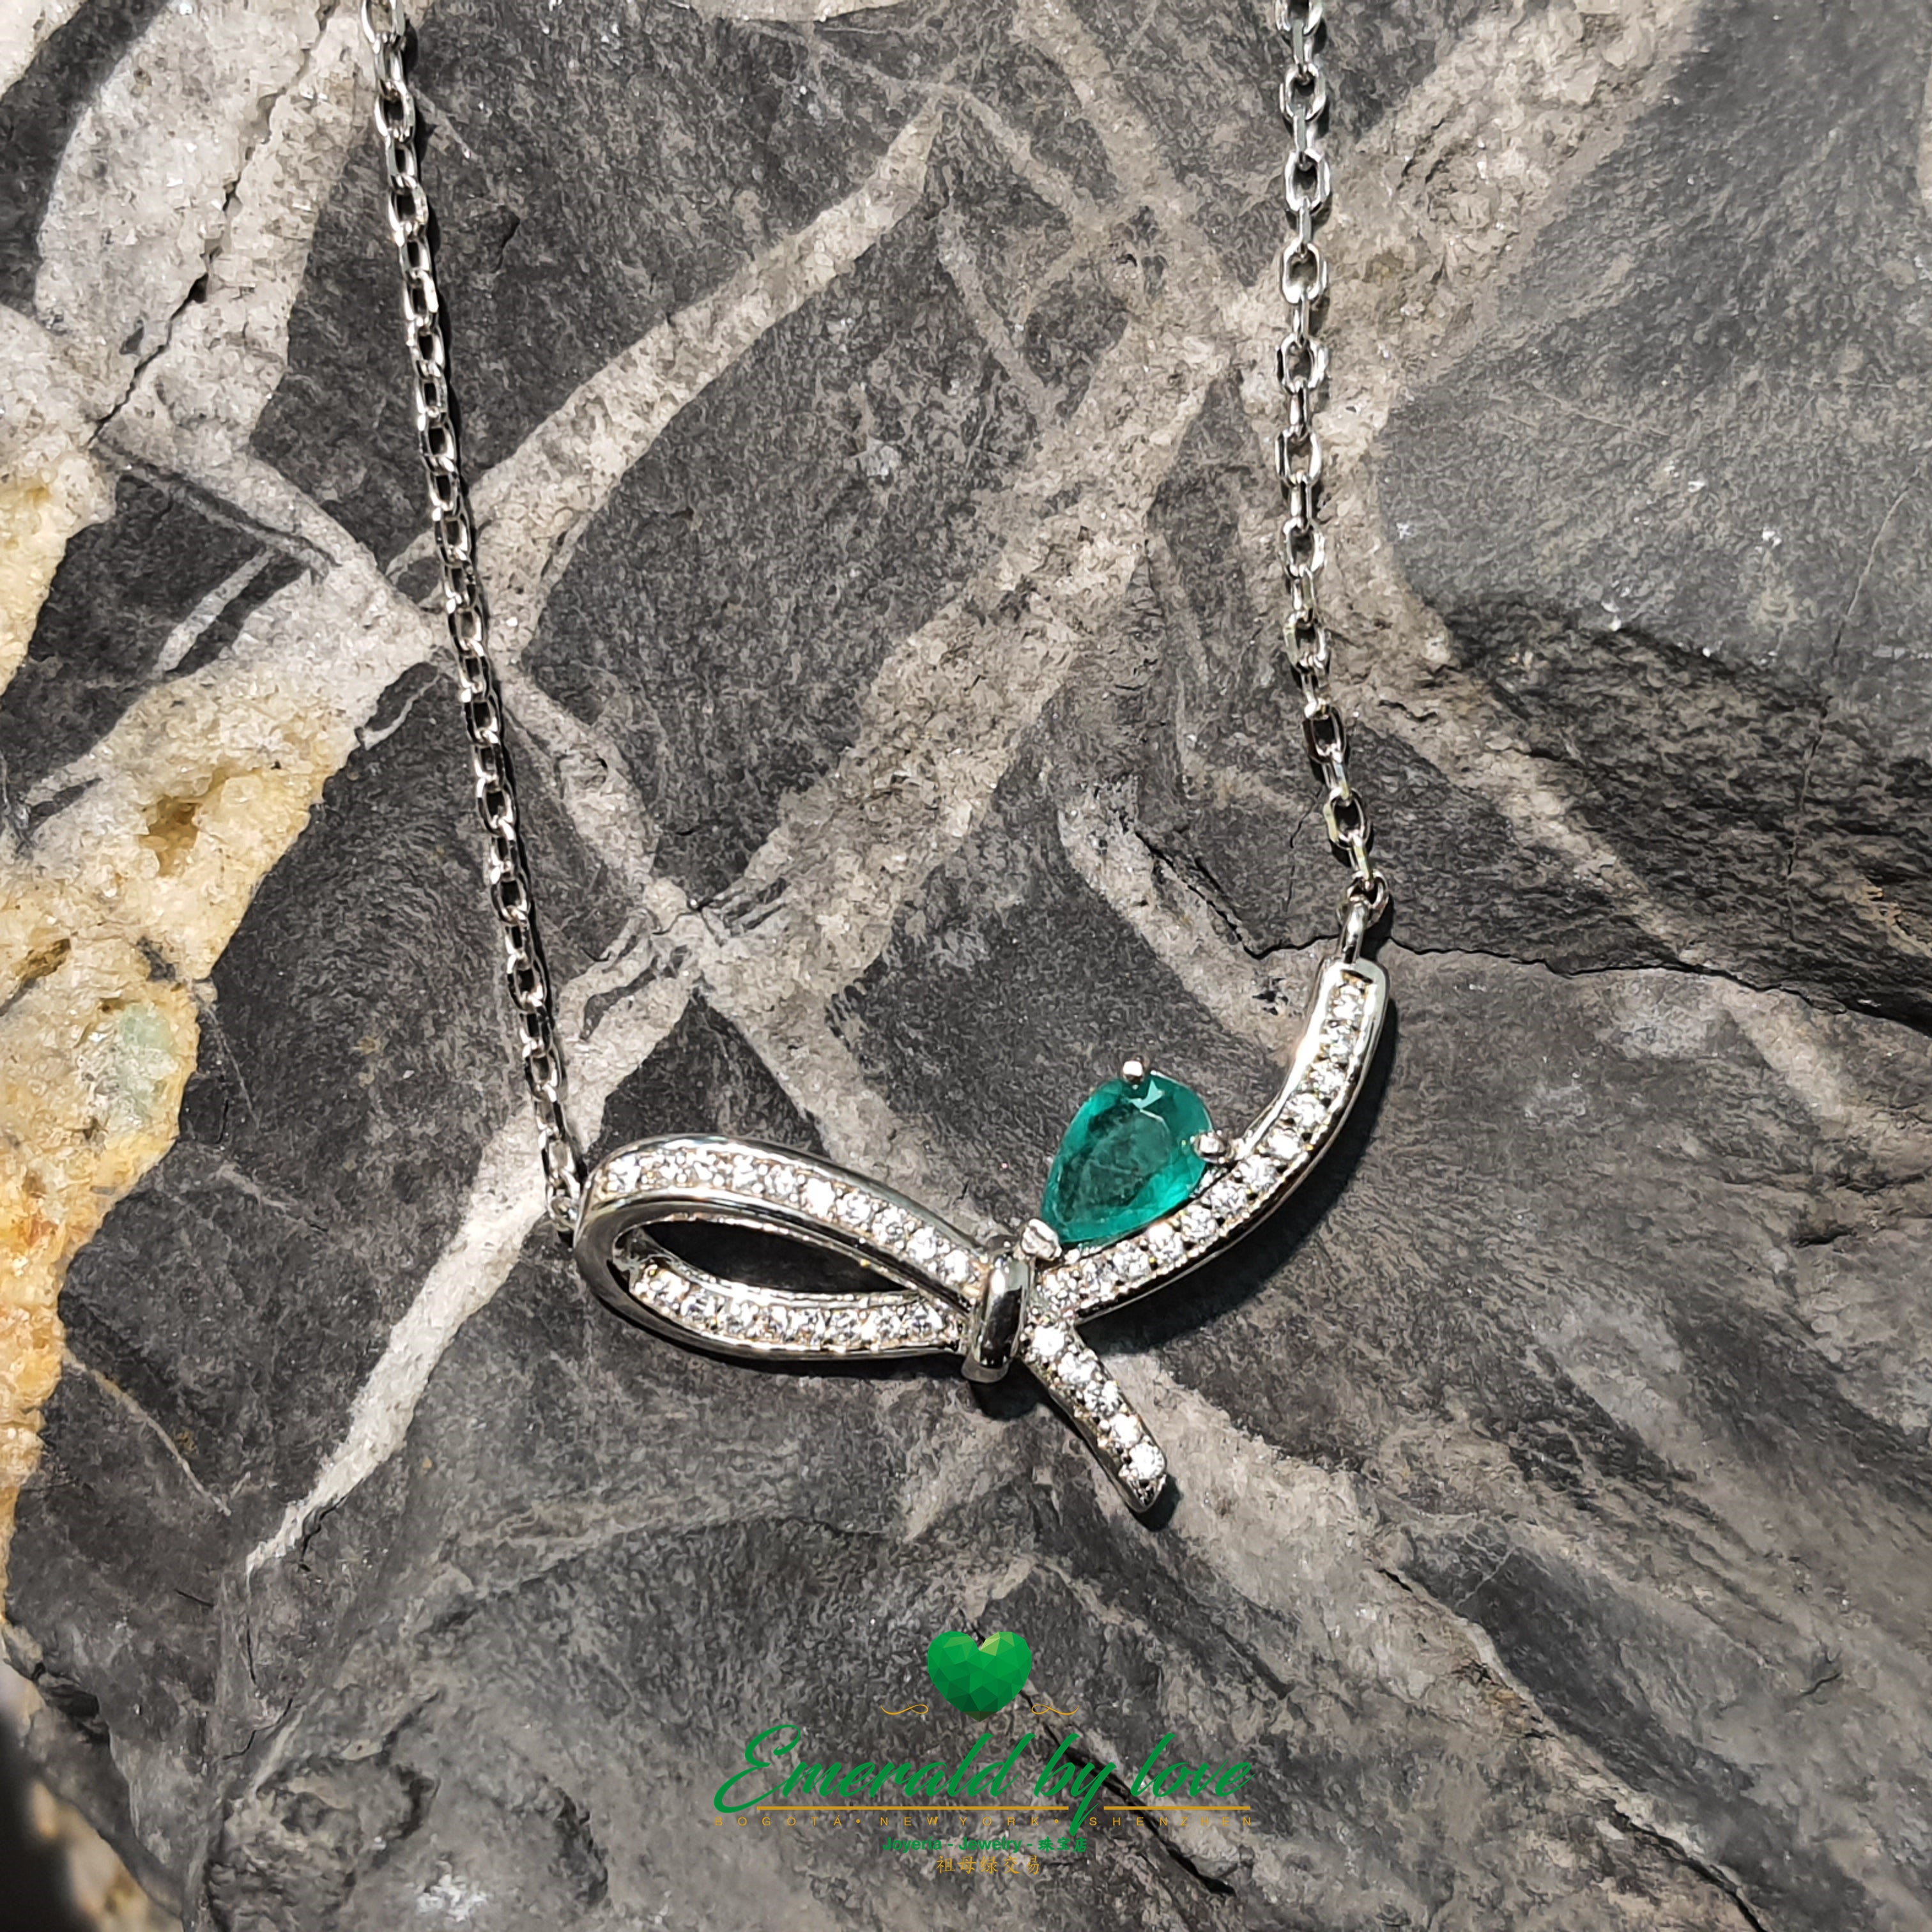 Simple Bow-Shaped Pendant with Teardrop Crystal Emerald